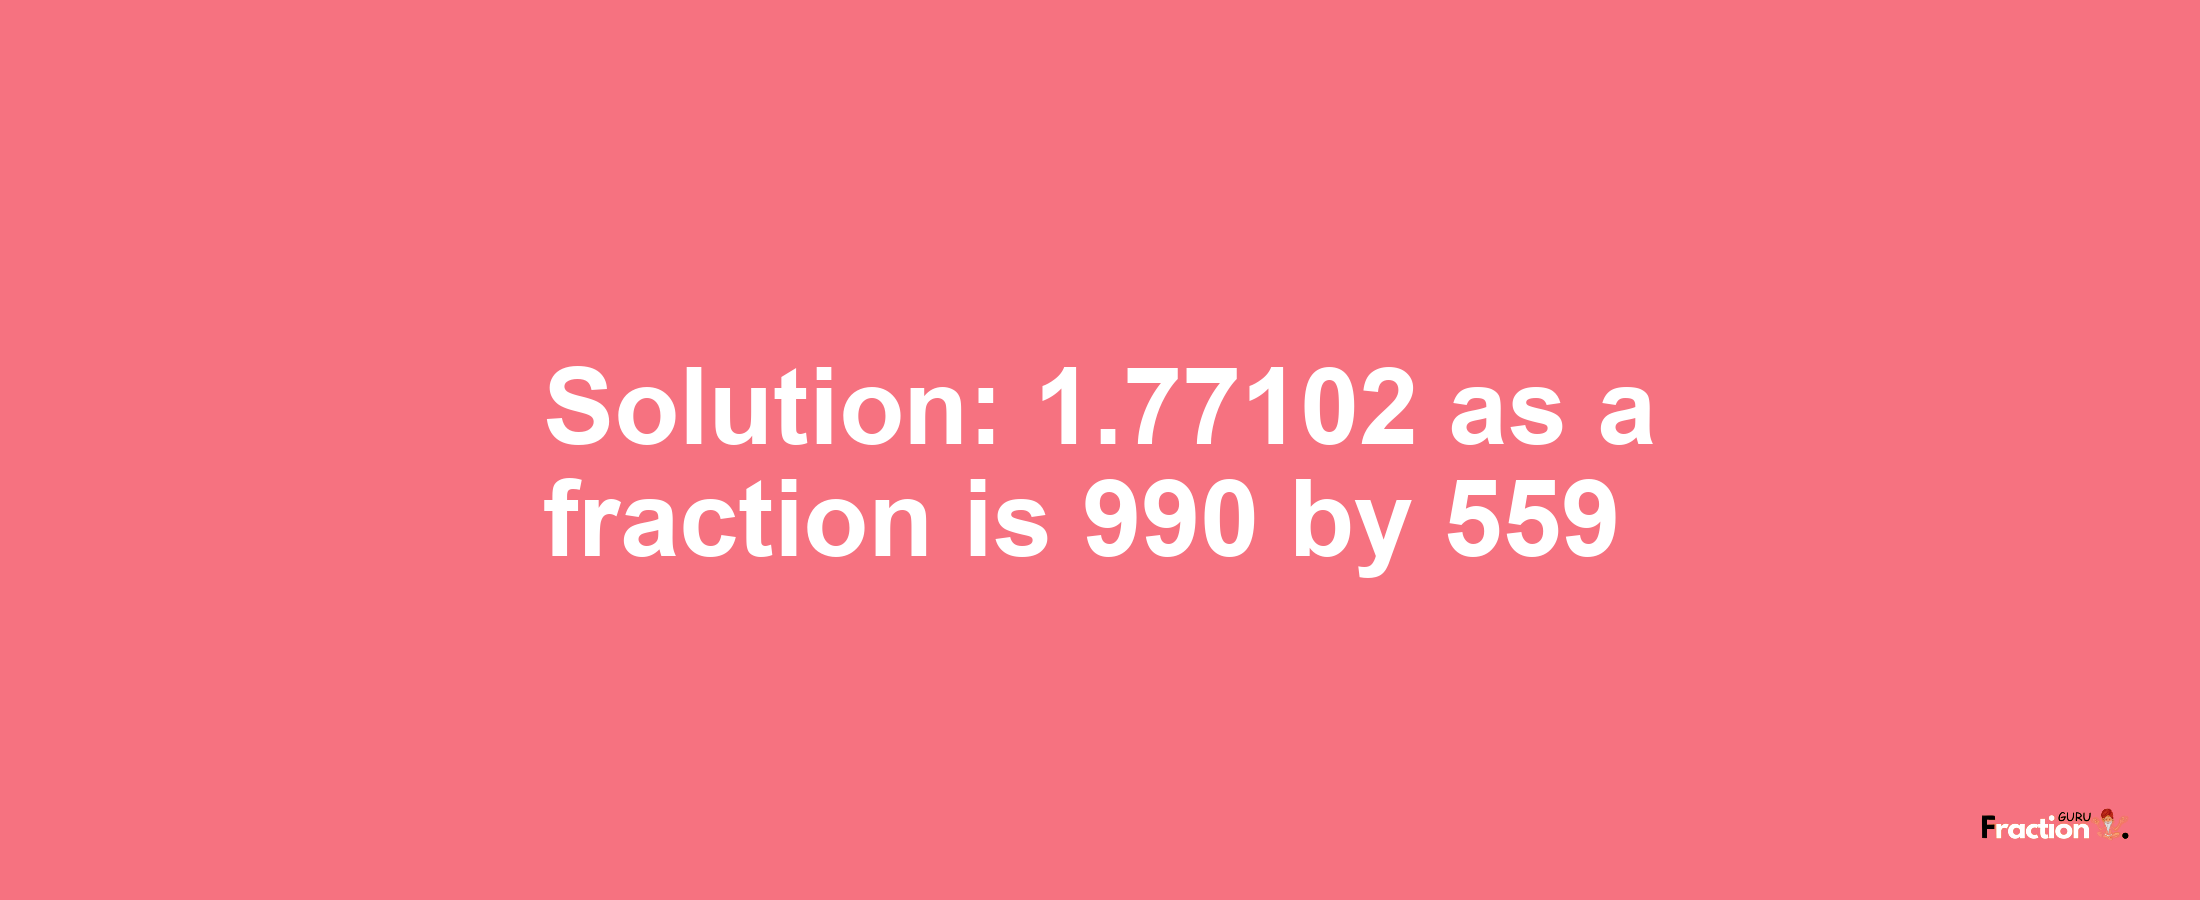 Solution:1.77102 as a fraction is 990/559